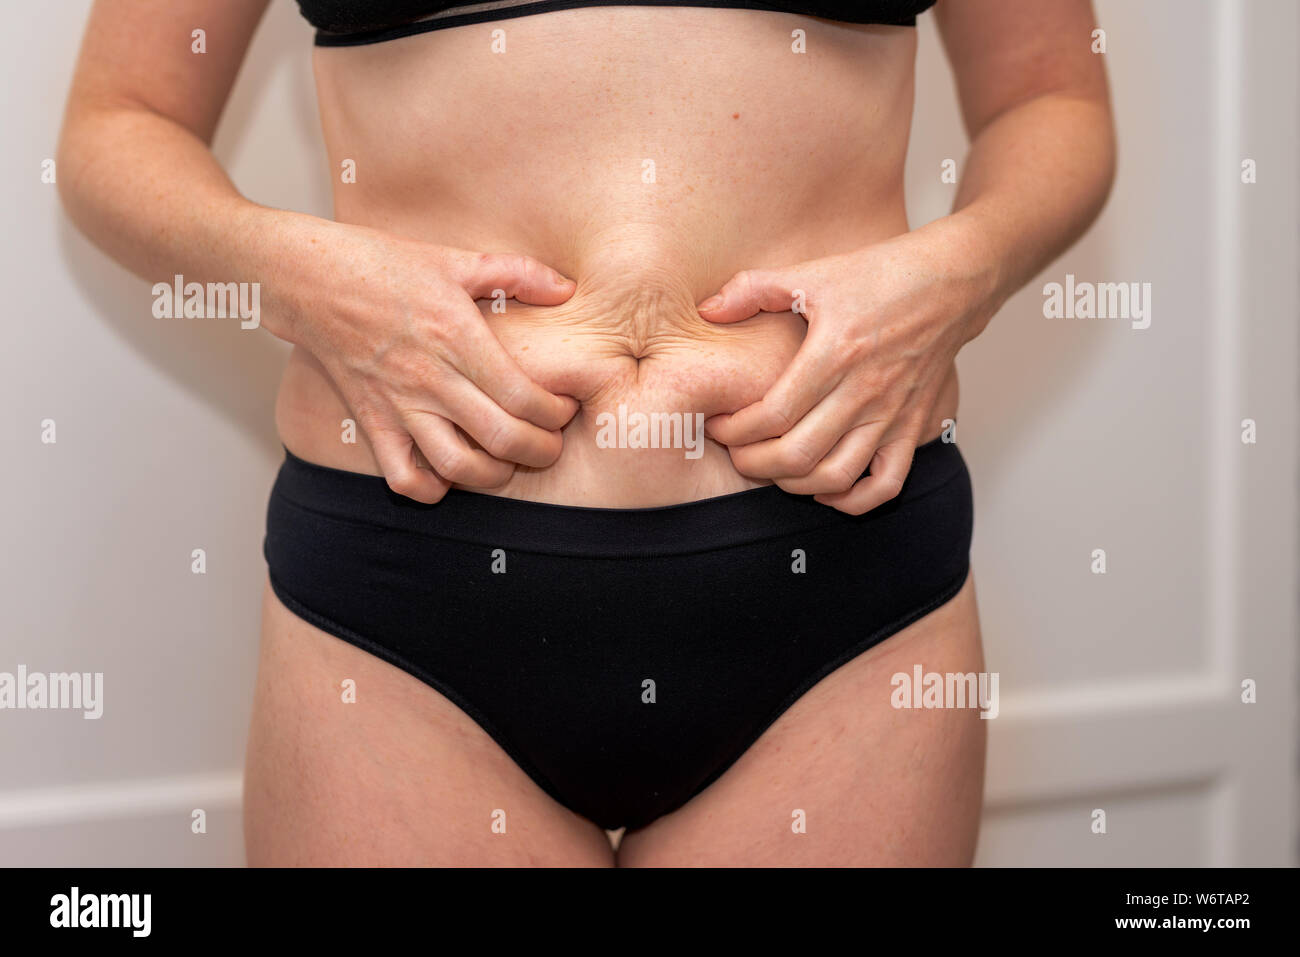 fat female belly woman holding her skin for cellulite check getting rid of belly fat and weight loss women body fat belly front view W6TAP2